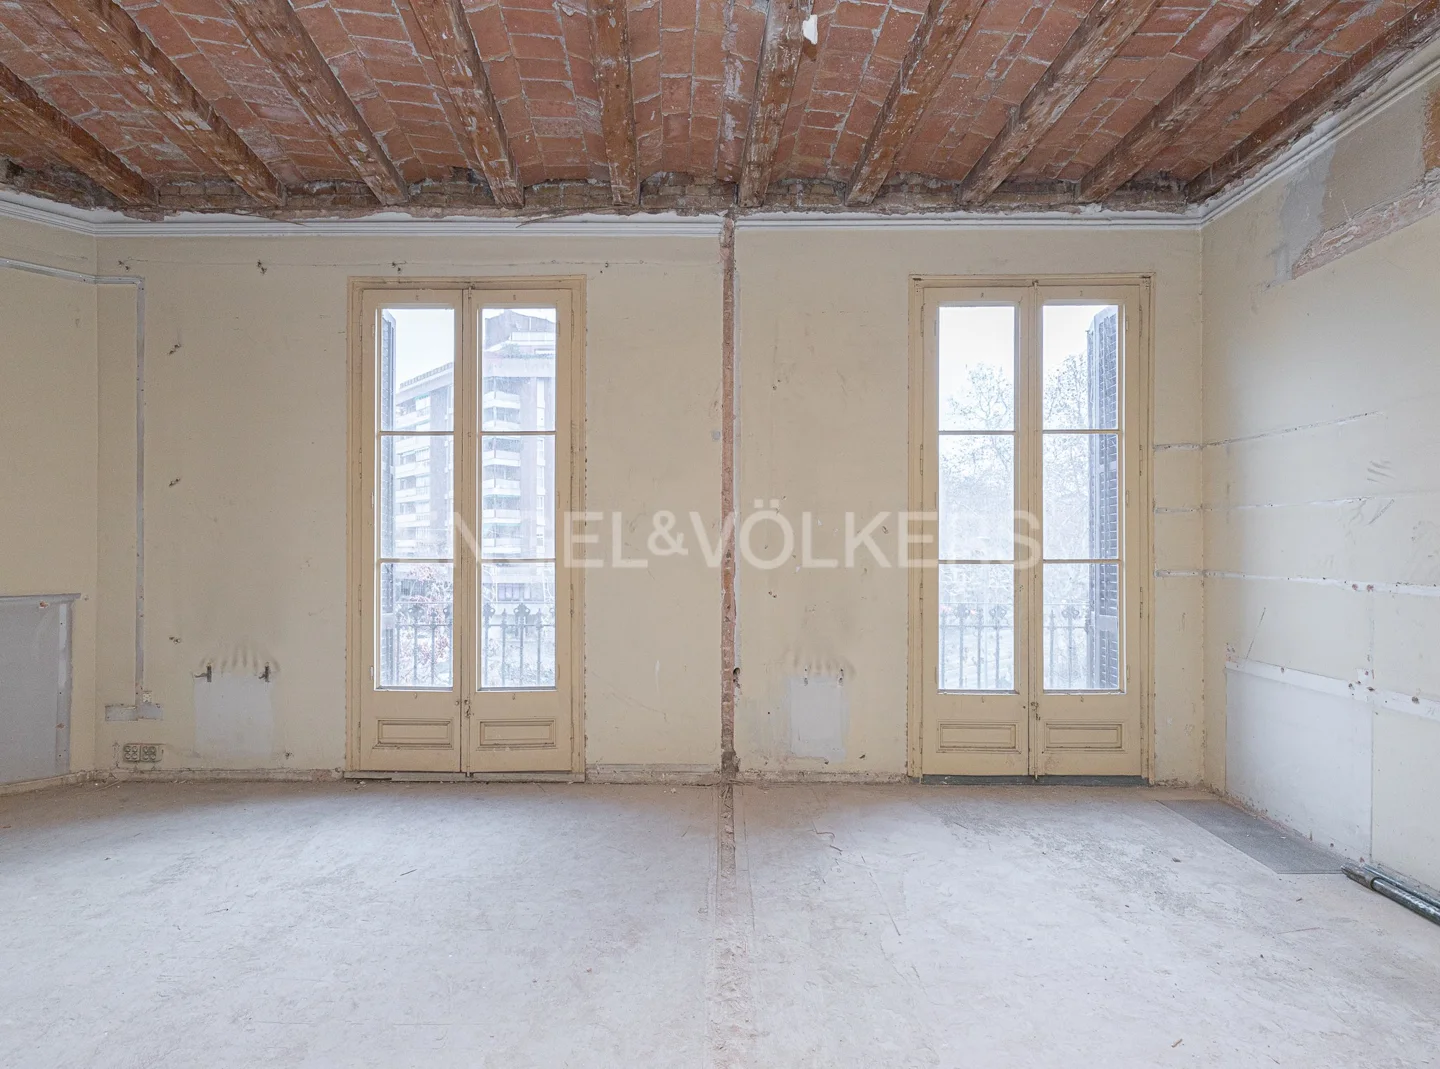 Apartment to renovate in Eixample on Passeig San Joan